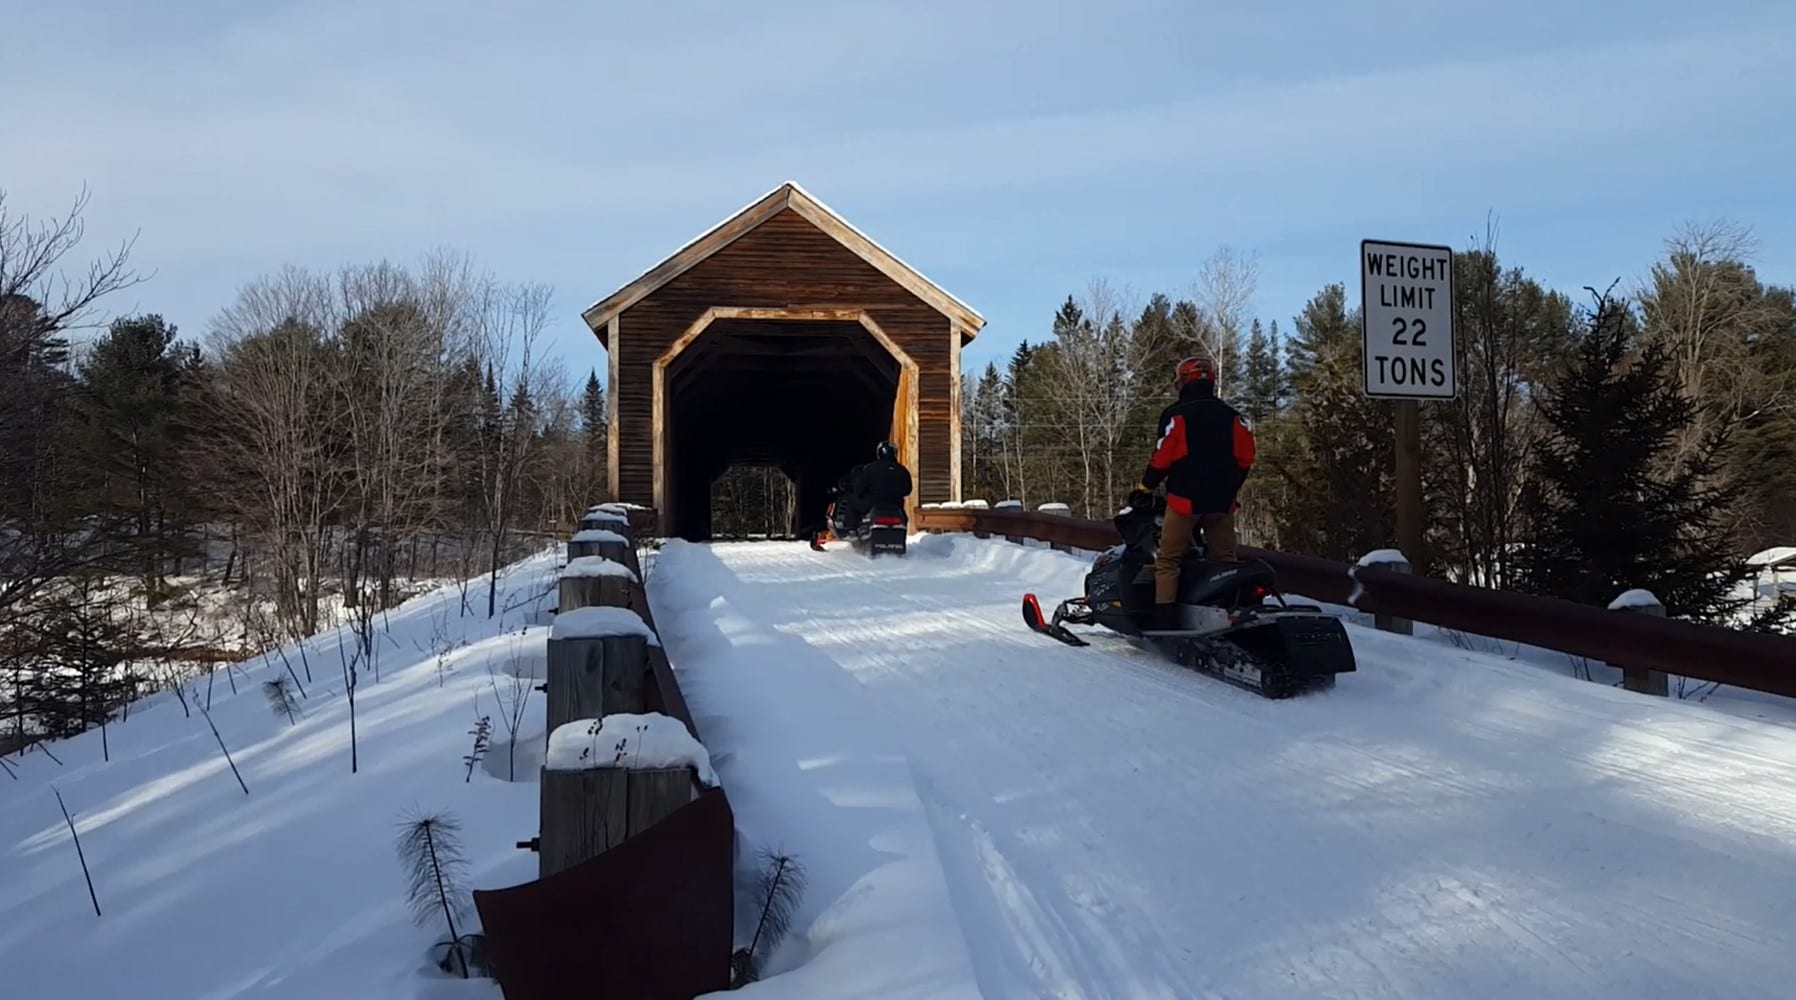 Snowmobiling through Low's Covered Bridge on ITS 85 in Maine